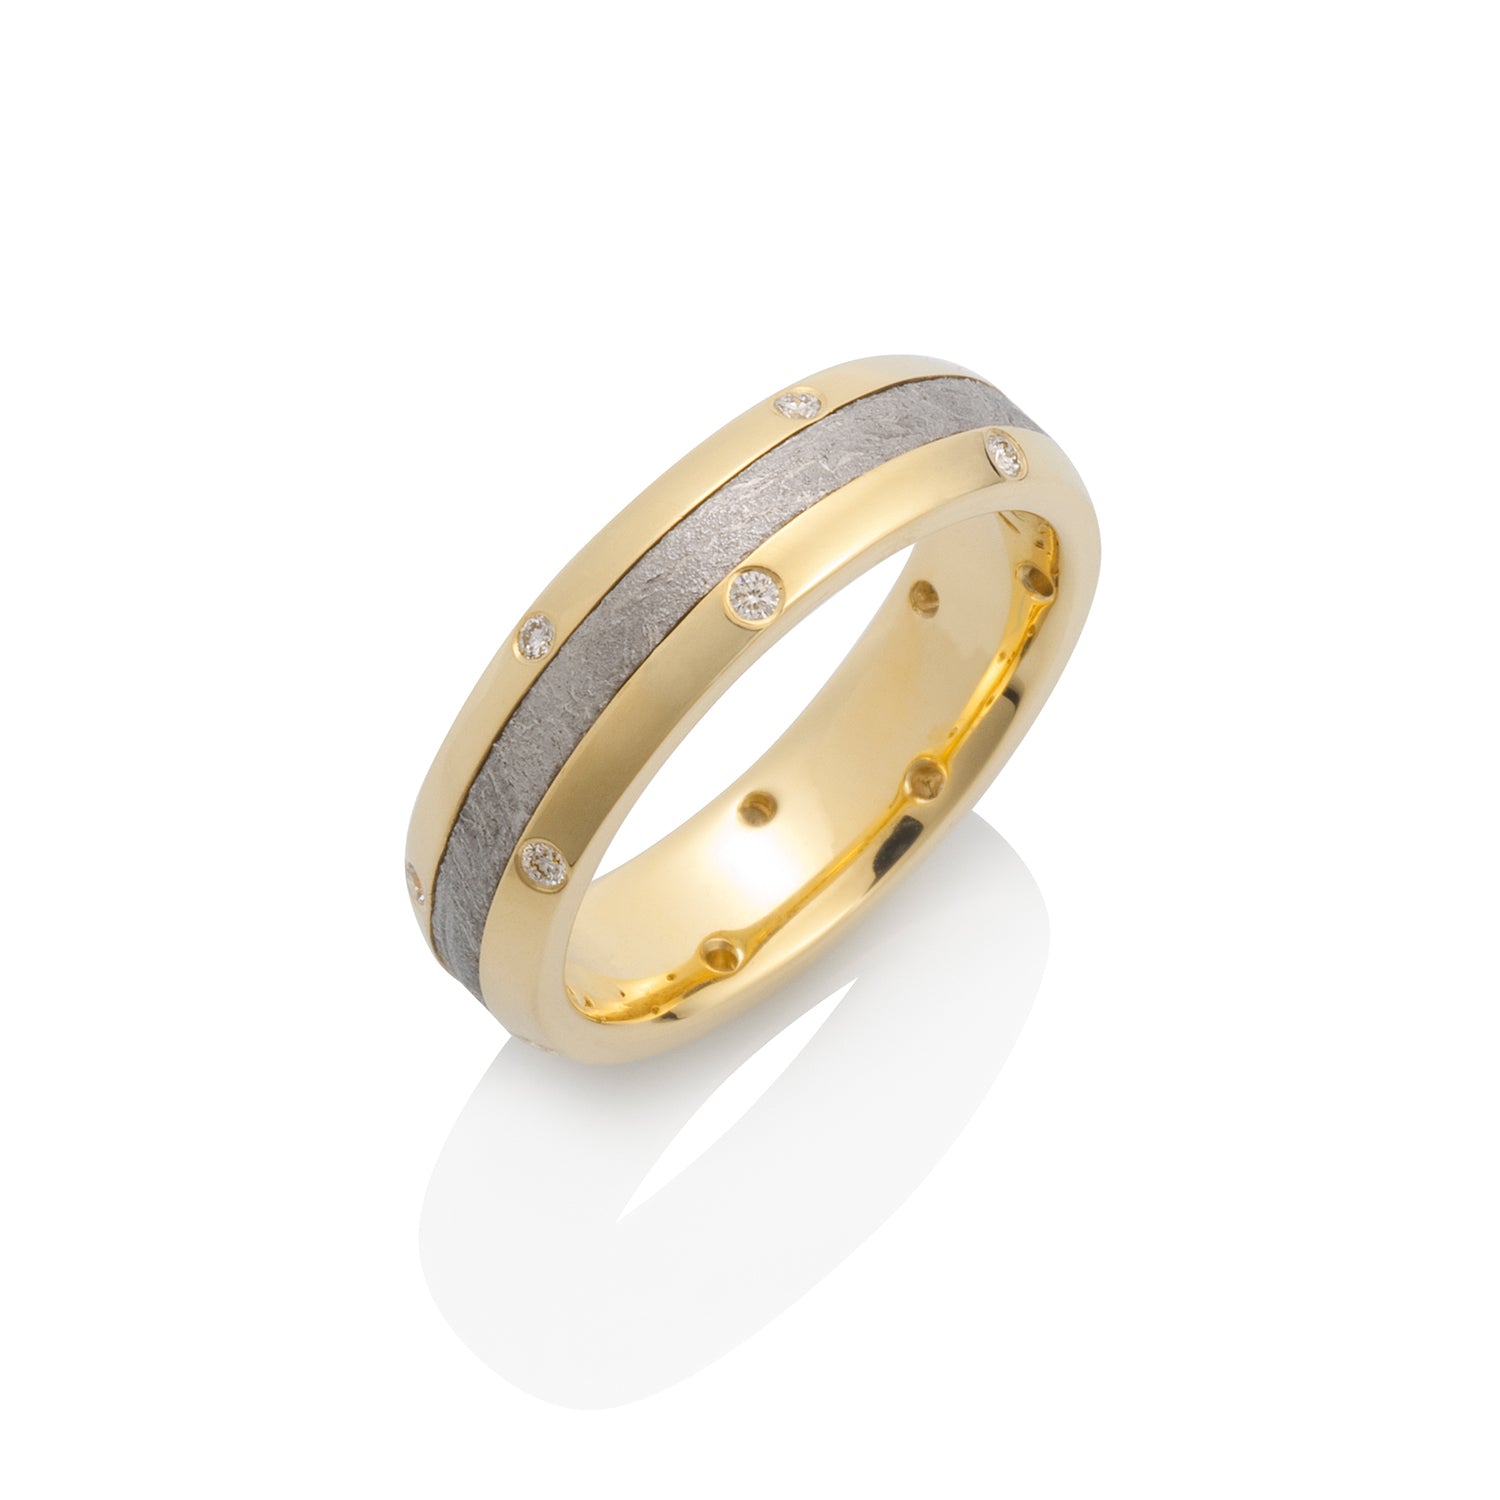 Canopus Meteorite Diamond Ring by Chris Ploof - 18k Yellow Gold - Talisman Collection Fine Jewelers